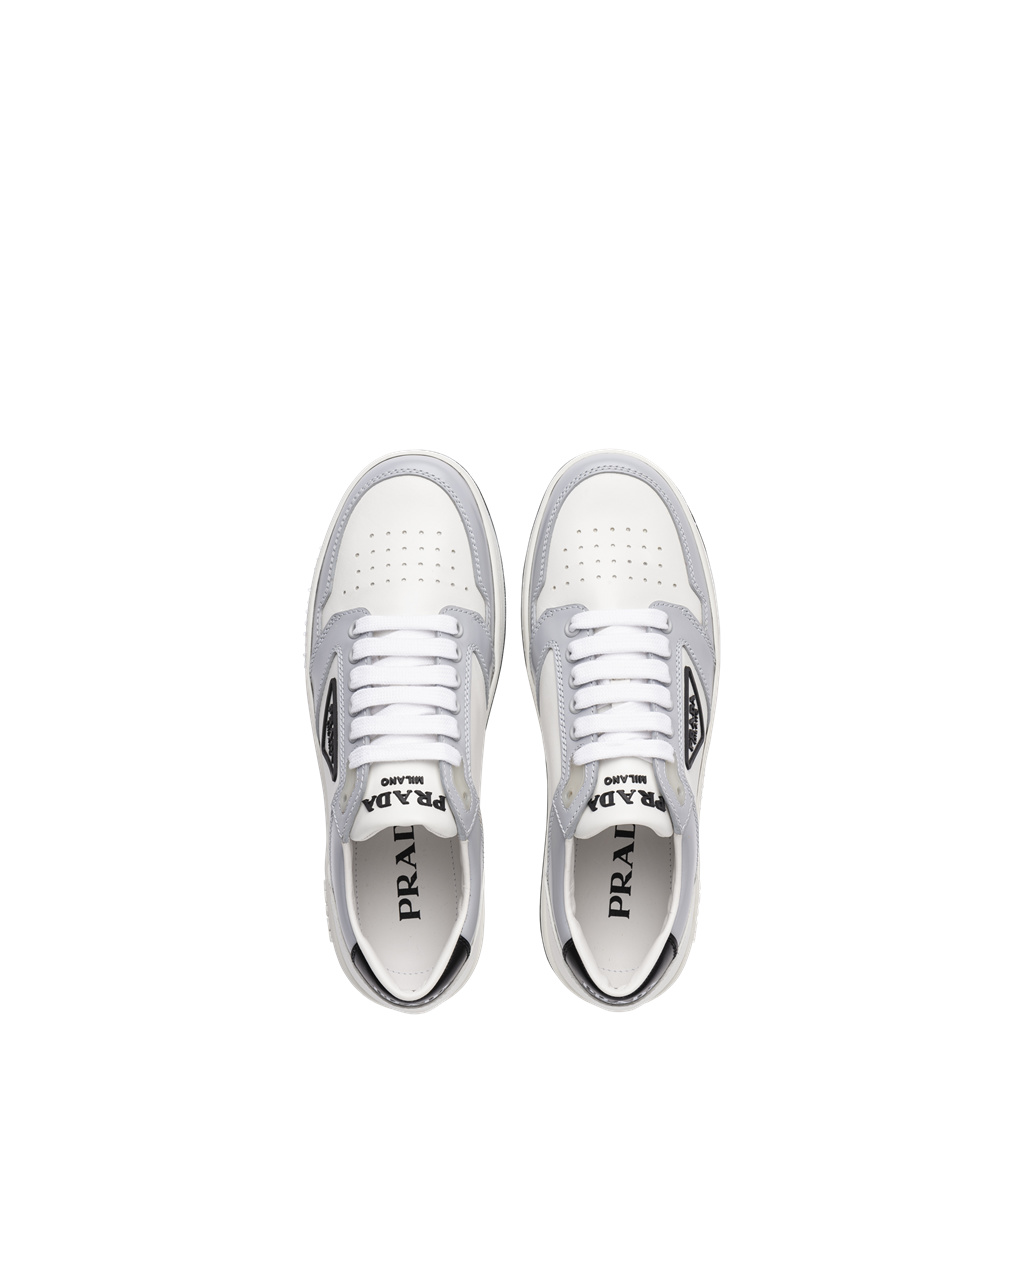 Prada District Perforated Leather Sneakers Sale South Africa - Womens ...